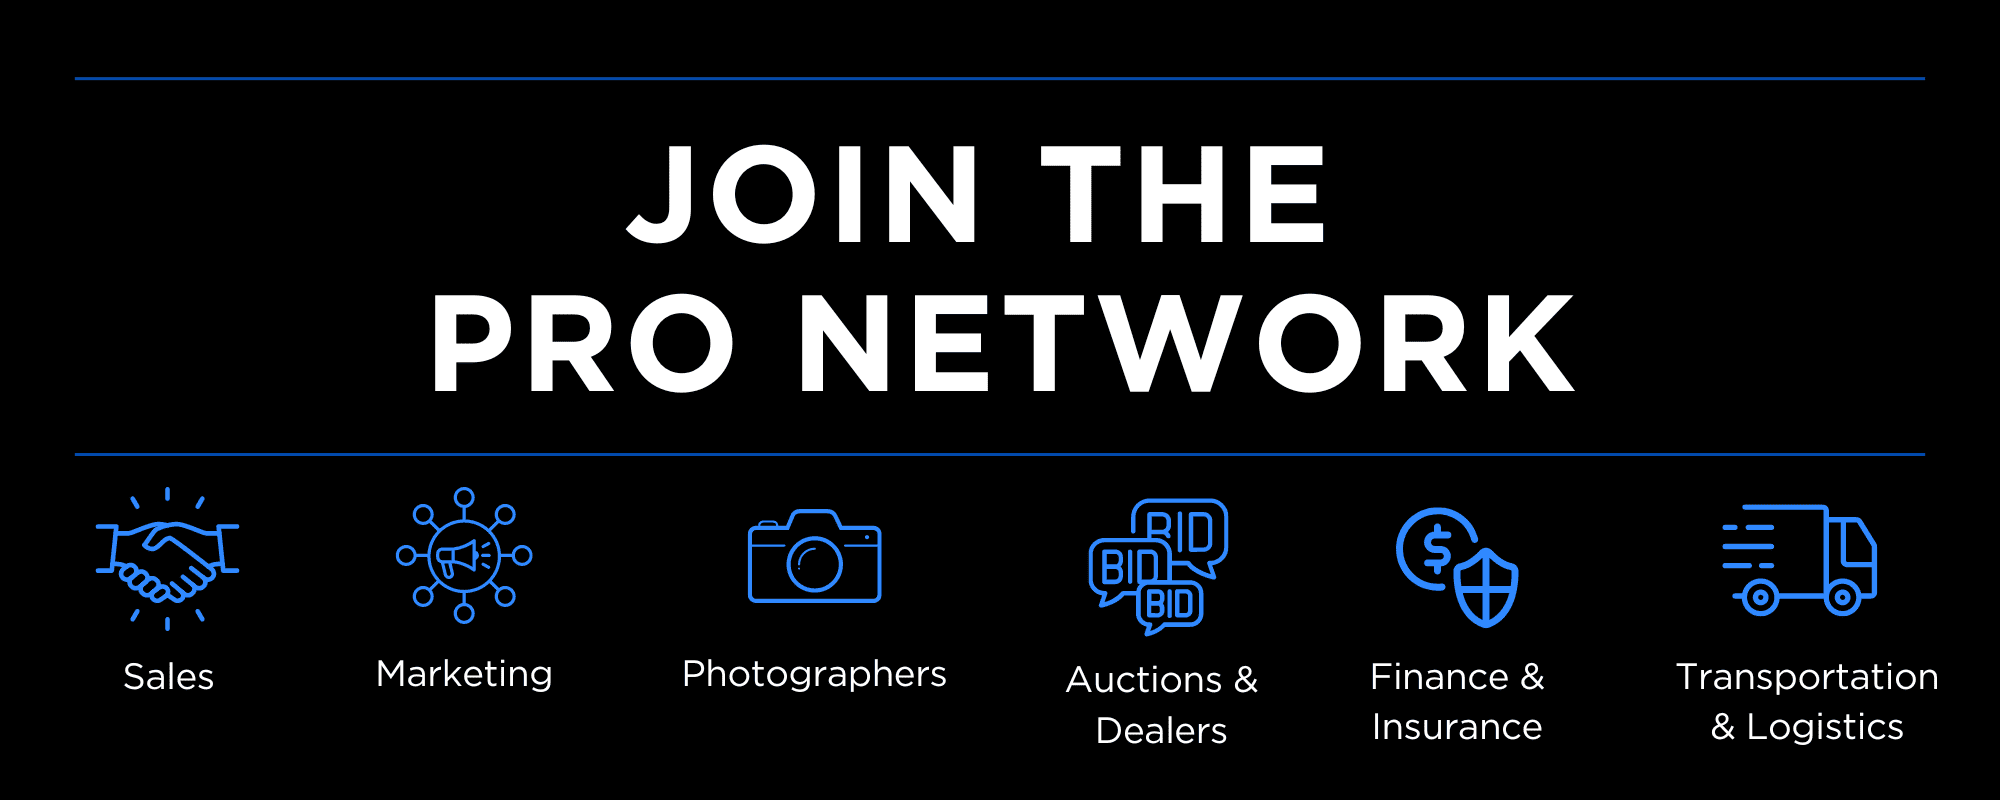 Join the Classic.com PRO Network